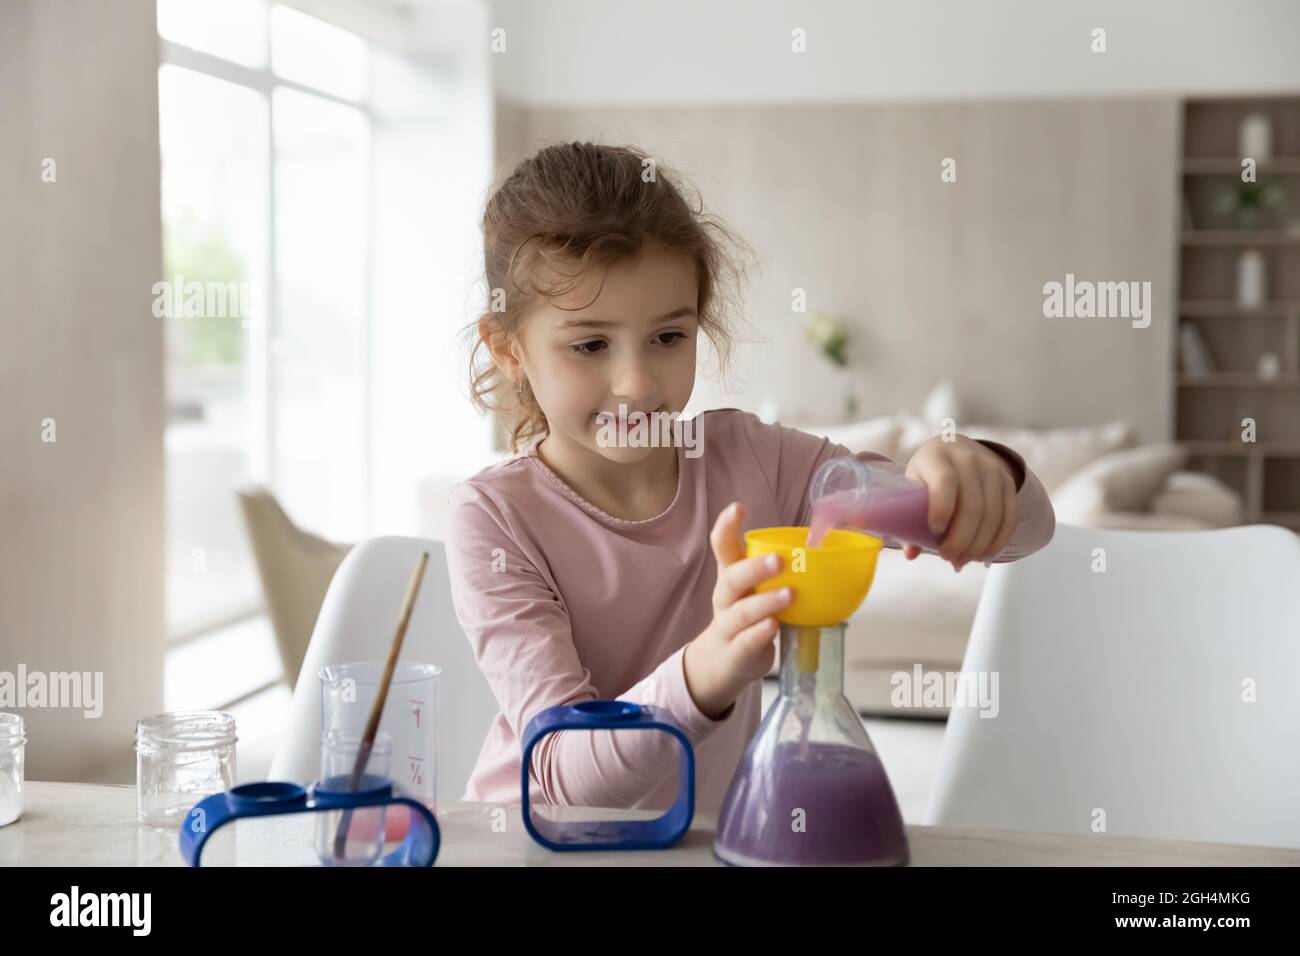 Happy smart kid girl making experiments at home. Stock Photo